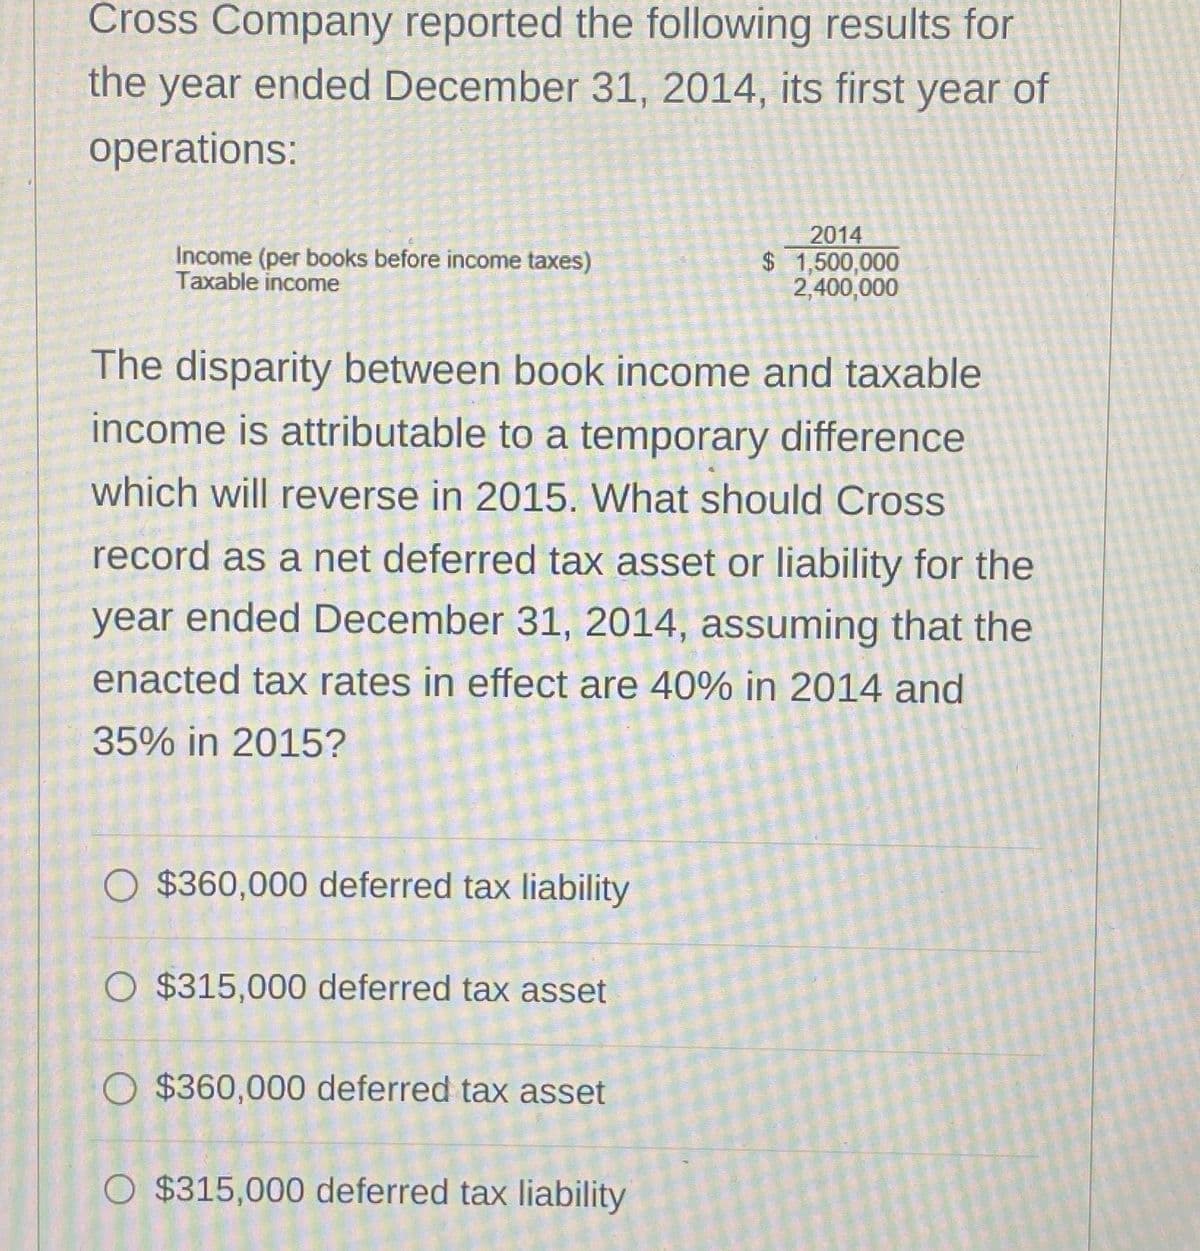 Cross Company reported the following results for
the year ended December 31, 2014, its first year of
operations:
Income (per books before income taxes)
Taxable income
2014
$ 1,500,000
2,400,000
The disparity between book income and taxable
income is attributable to a temporary difference
which will reverse in 2015. What should Cross
record as a net deferred tax asset or liability for the
year ended December 31, 2014, assuming that the
enacted tax rates in effect are 40% in 2014 and
35% in 2015?
O $360,000 deferred tax liability
O $315,000 deferred tax asset
O $360,000 deferred tax asset
O $315,000 deferred tax liability